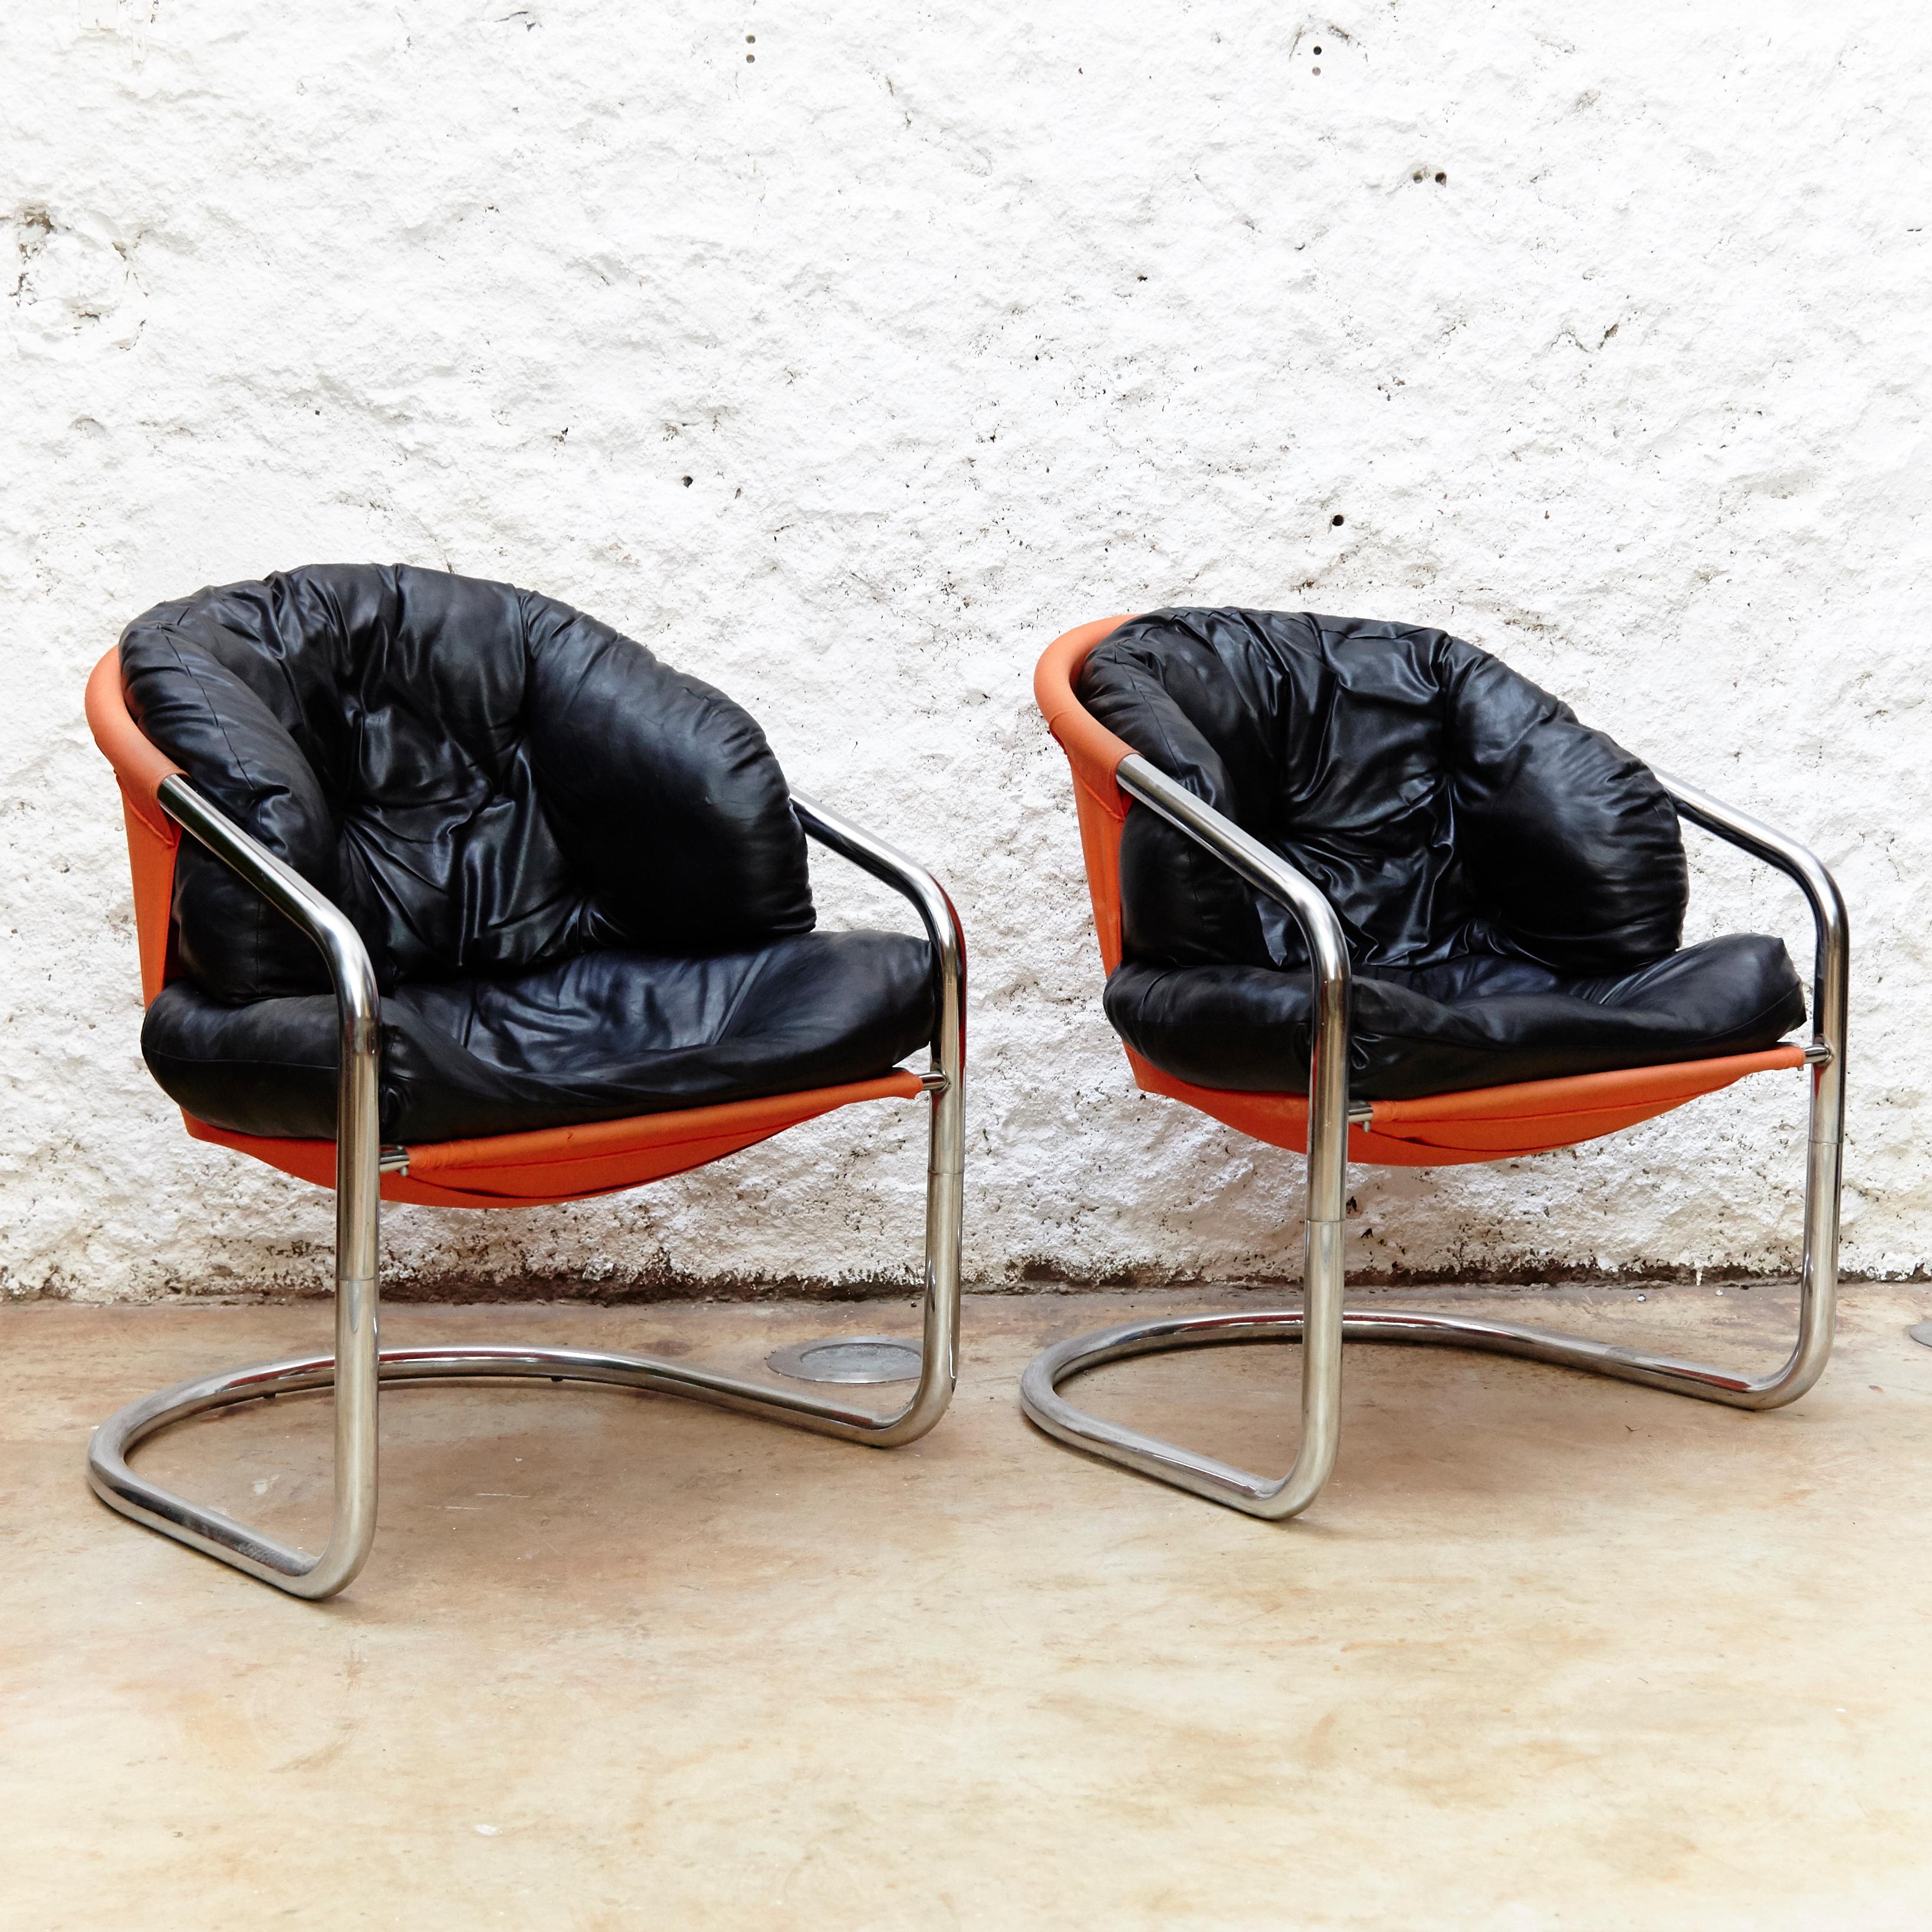 Nice pair of decorative easy chairs by unknown manufacturer.
Combination of Skai and orange fabric with tubular metal frame.
Manufactured in Spain, circa 1970.

In original condition with minor wear consistent of age and use, preserving a